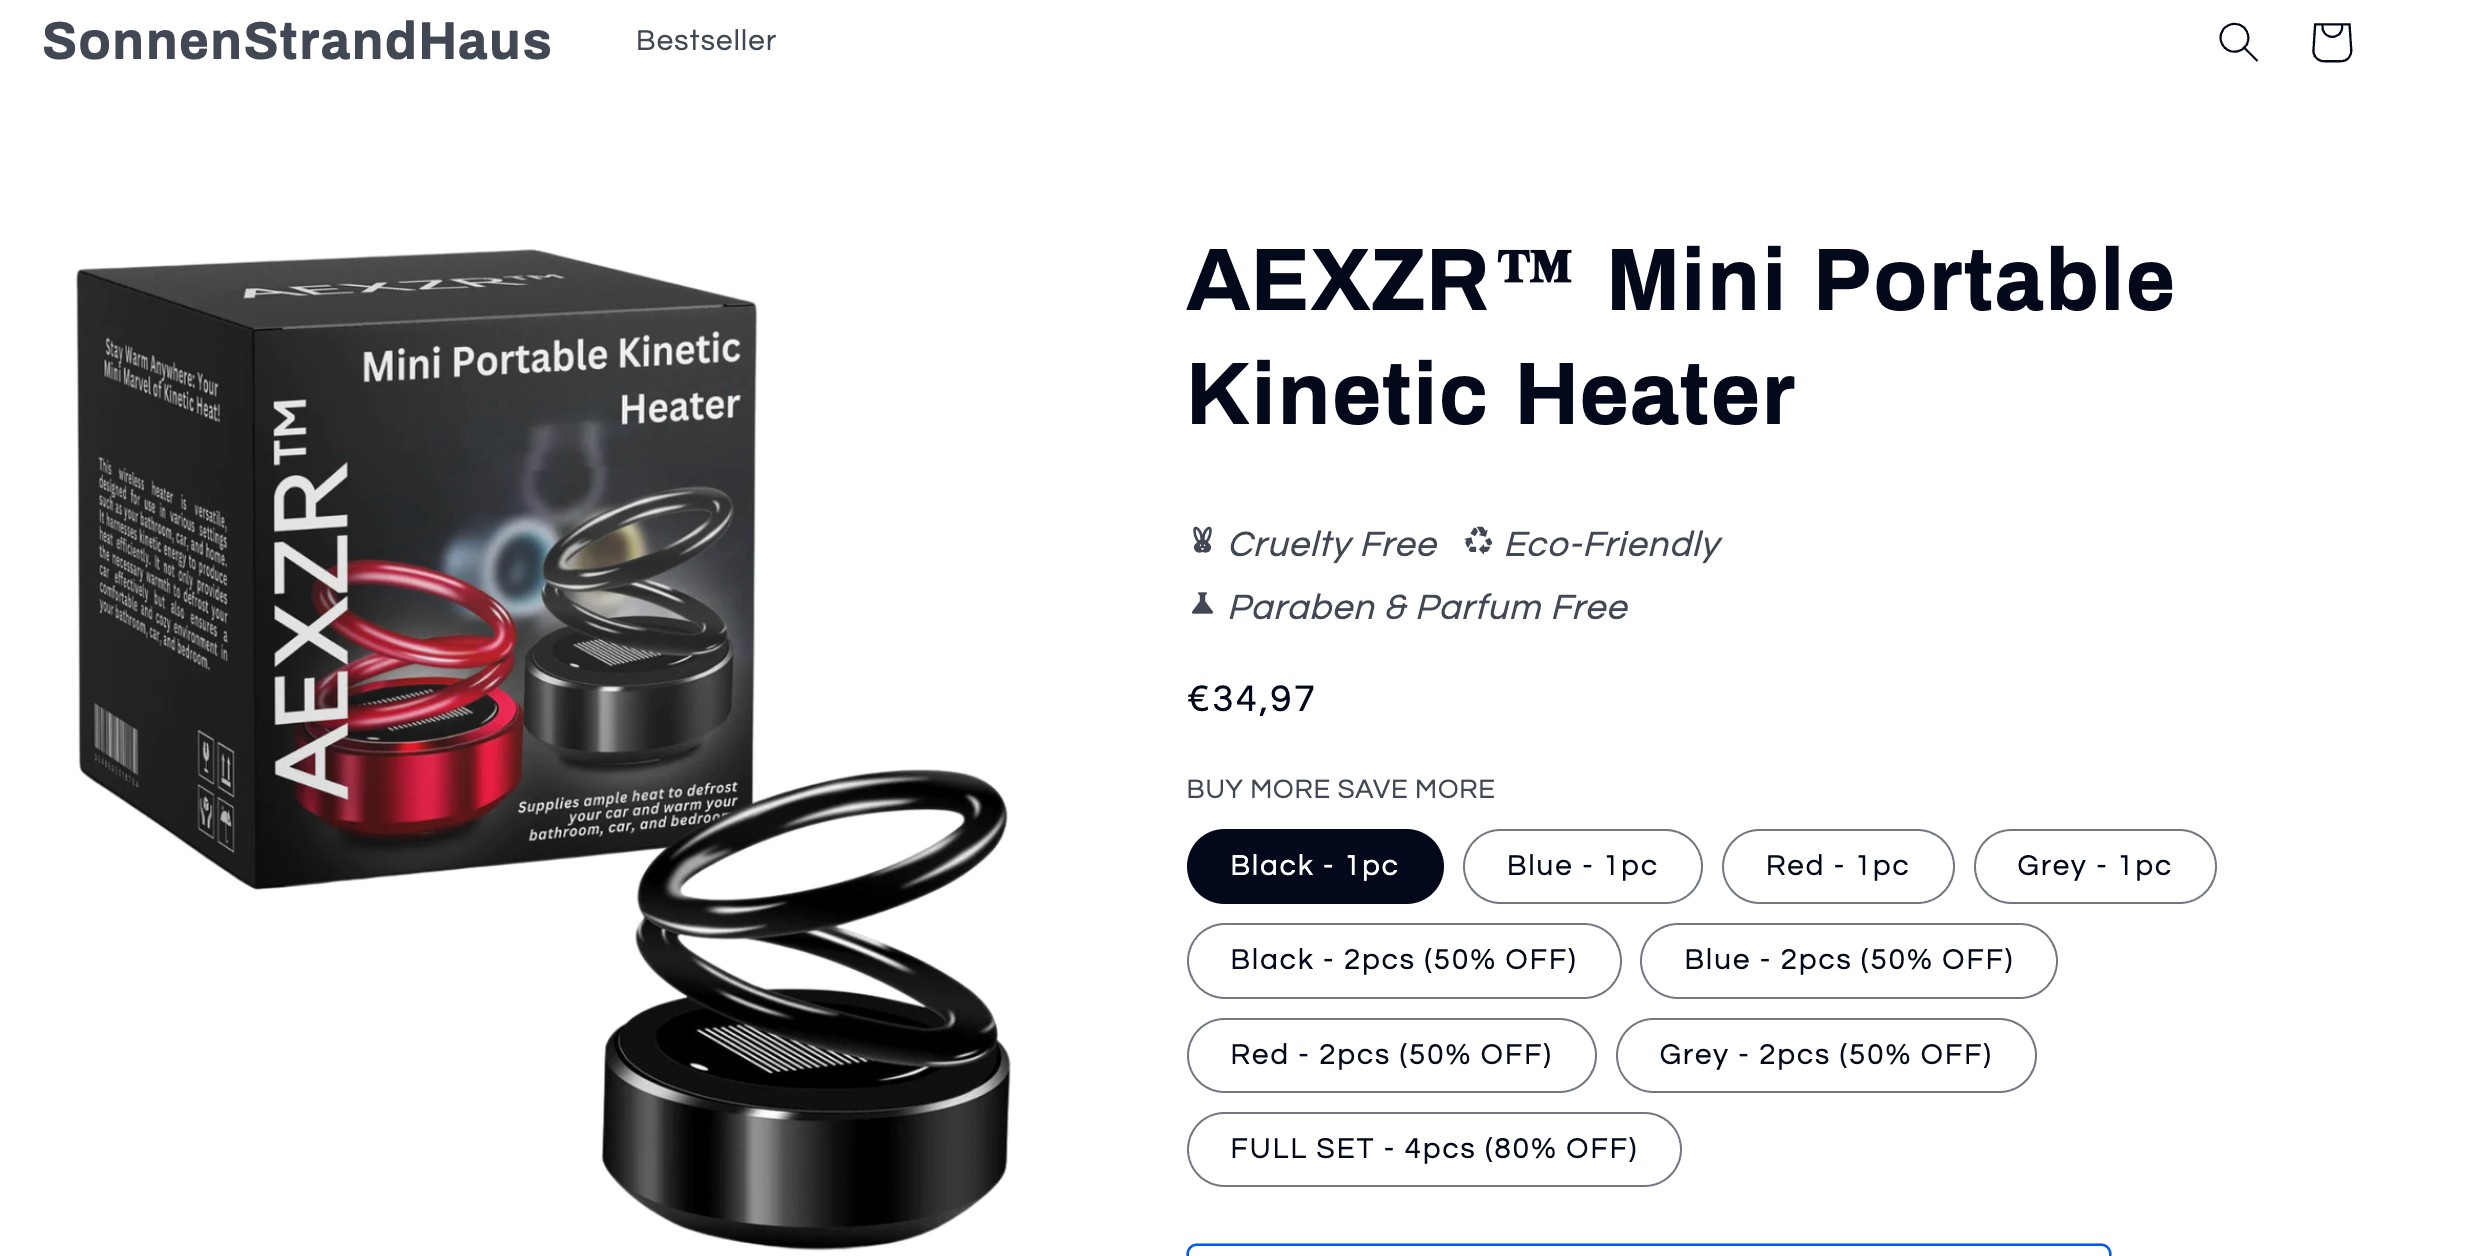 Mini Portable Kinetic Heater Review - A Nice Car Air Freshener 😂- NOT a  HEATER at ALL😂😂!! 